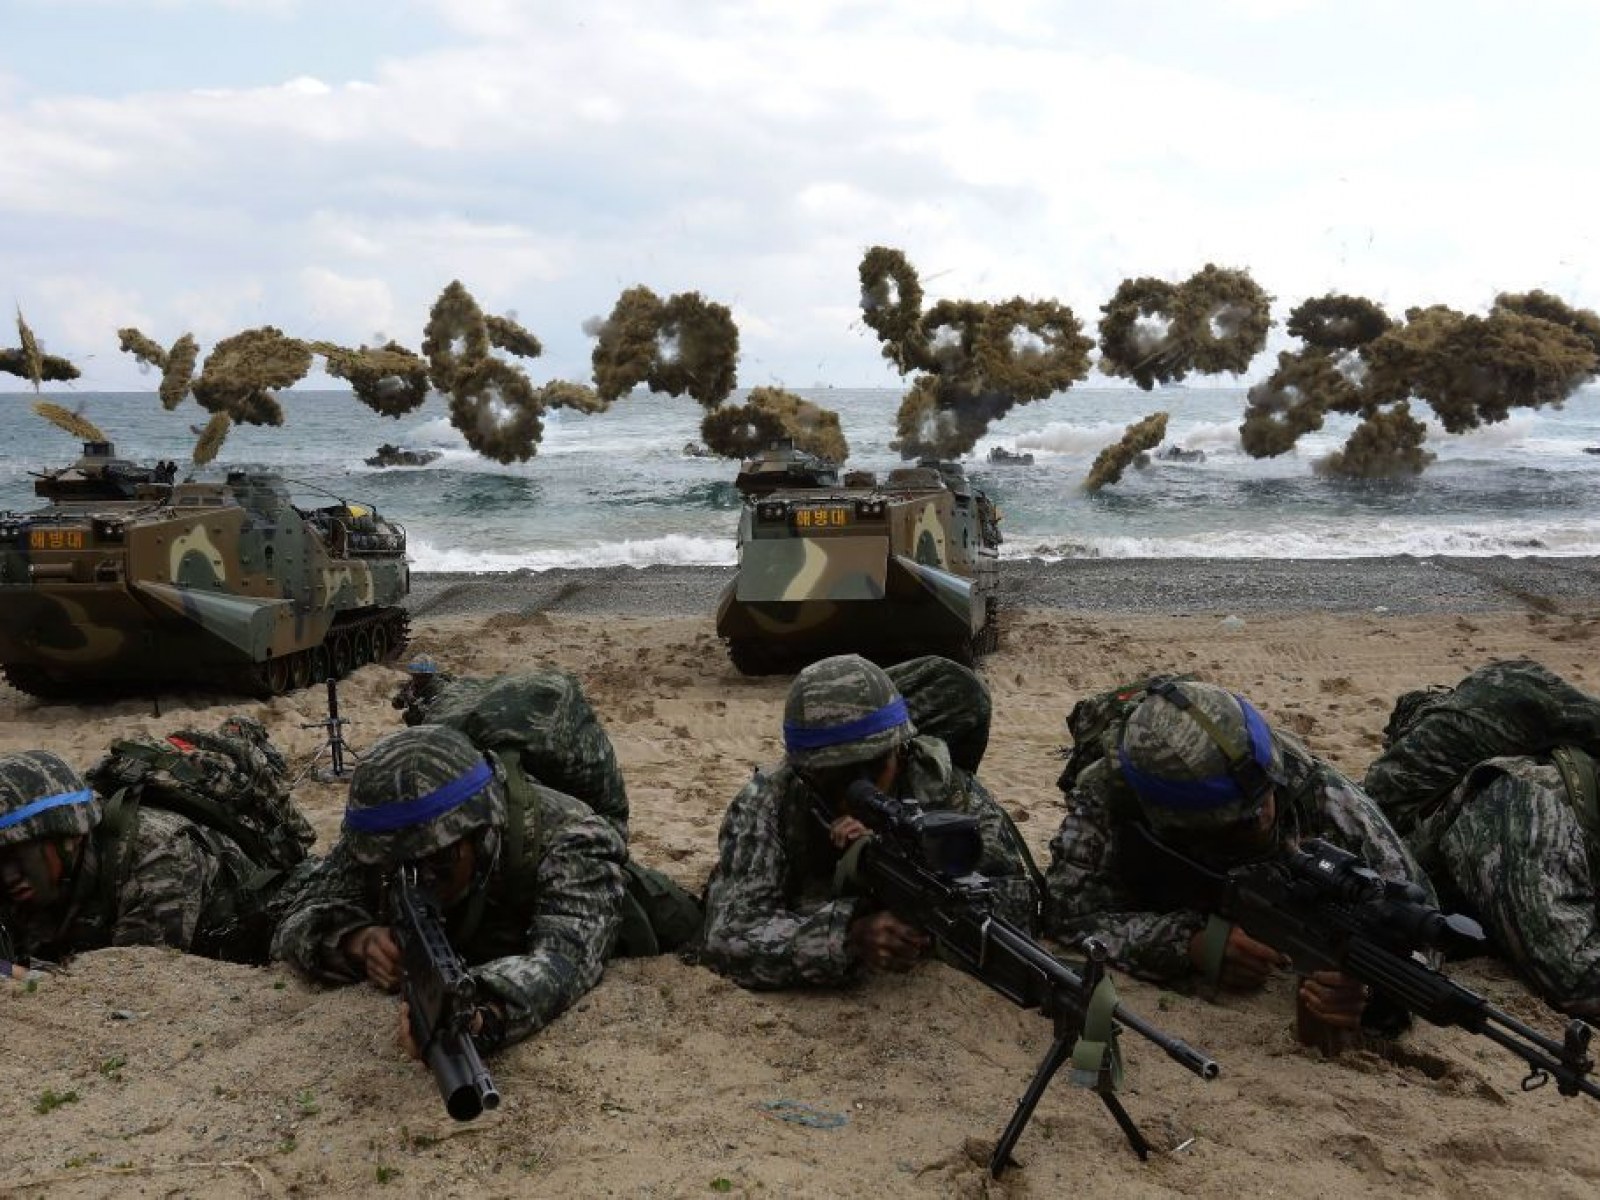 How Does U.S. Military Compare to North and South Korea? Washington and Seoul Suspend Exercises